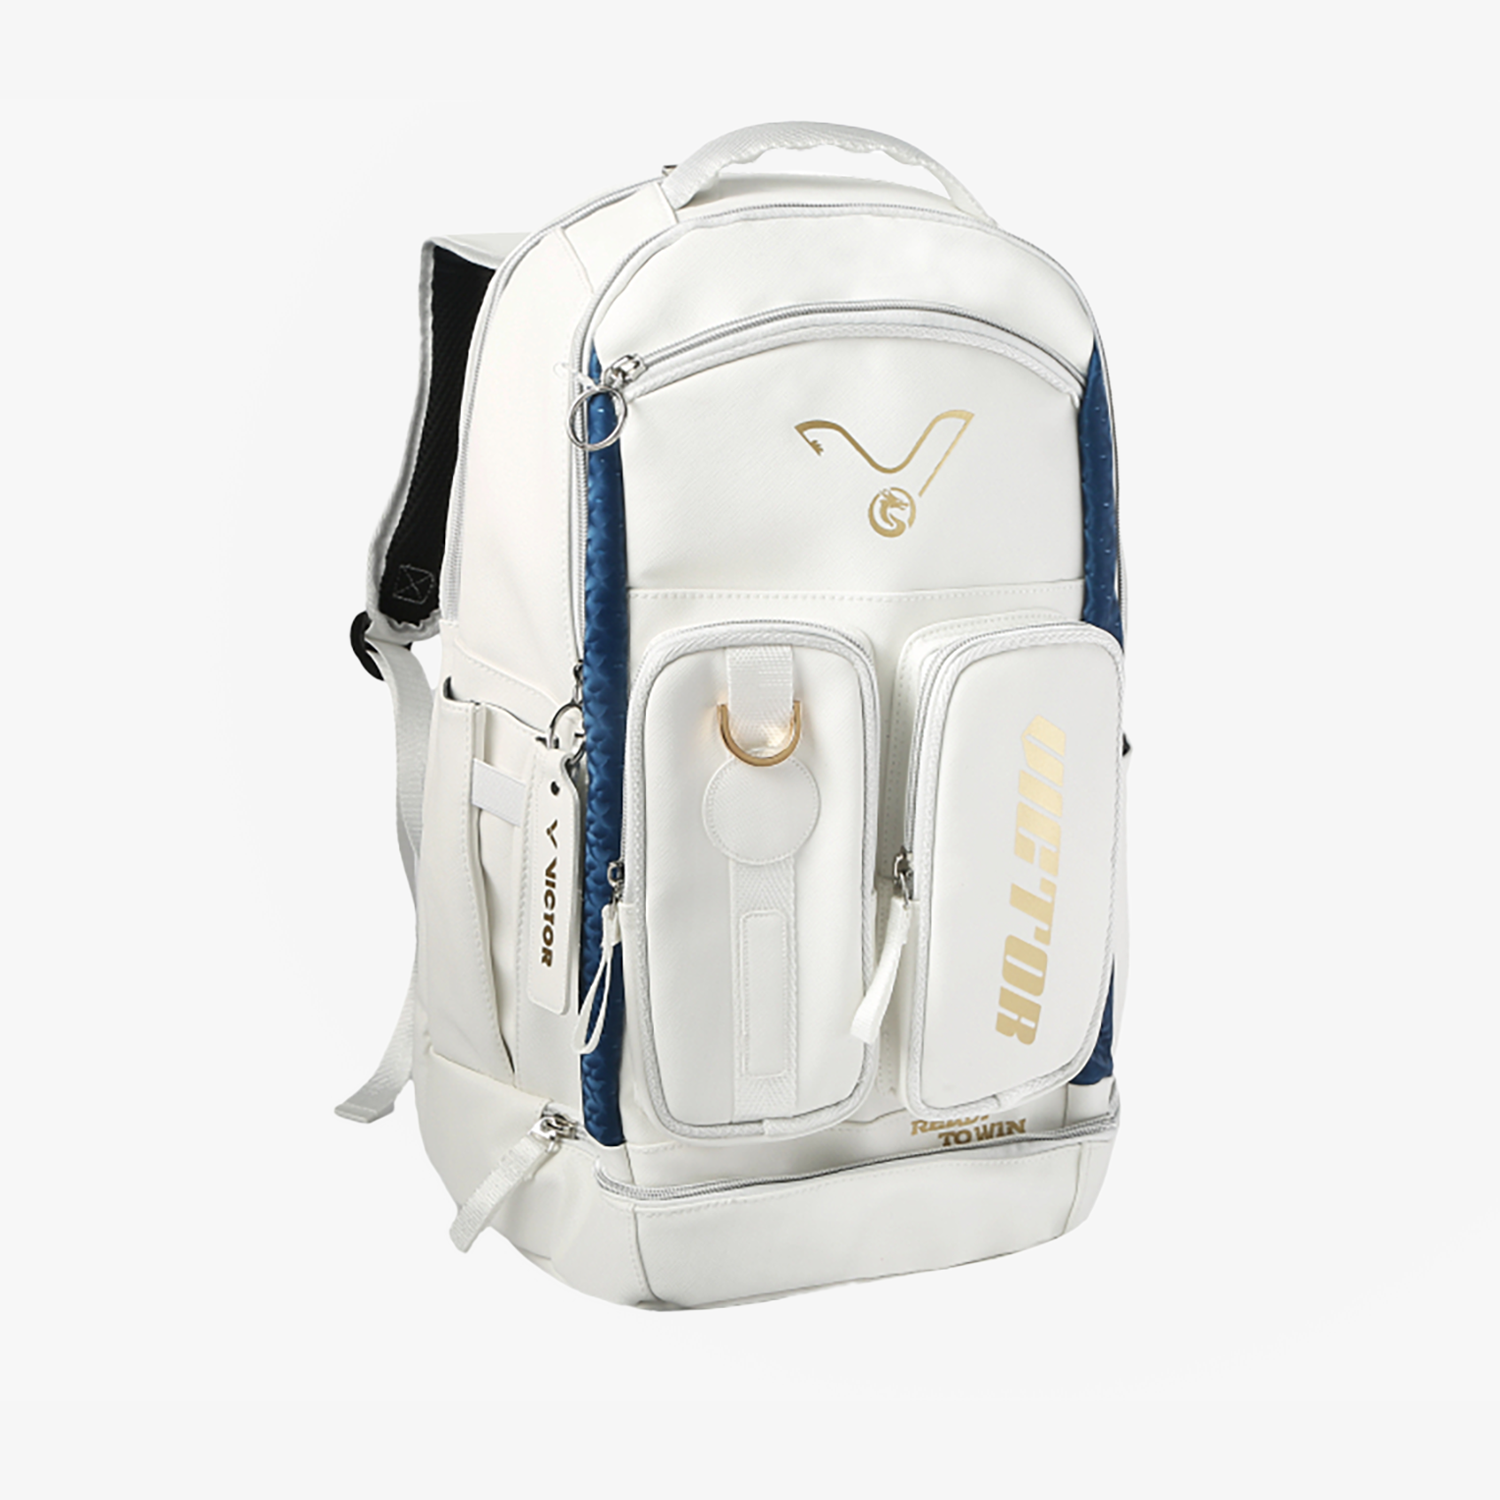 Victor Chinese New Year Racket Backpack BR5016CNYEX AB (White)